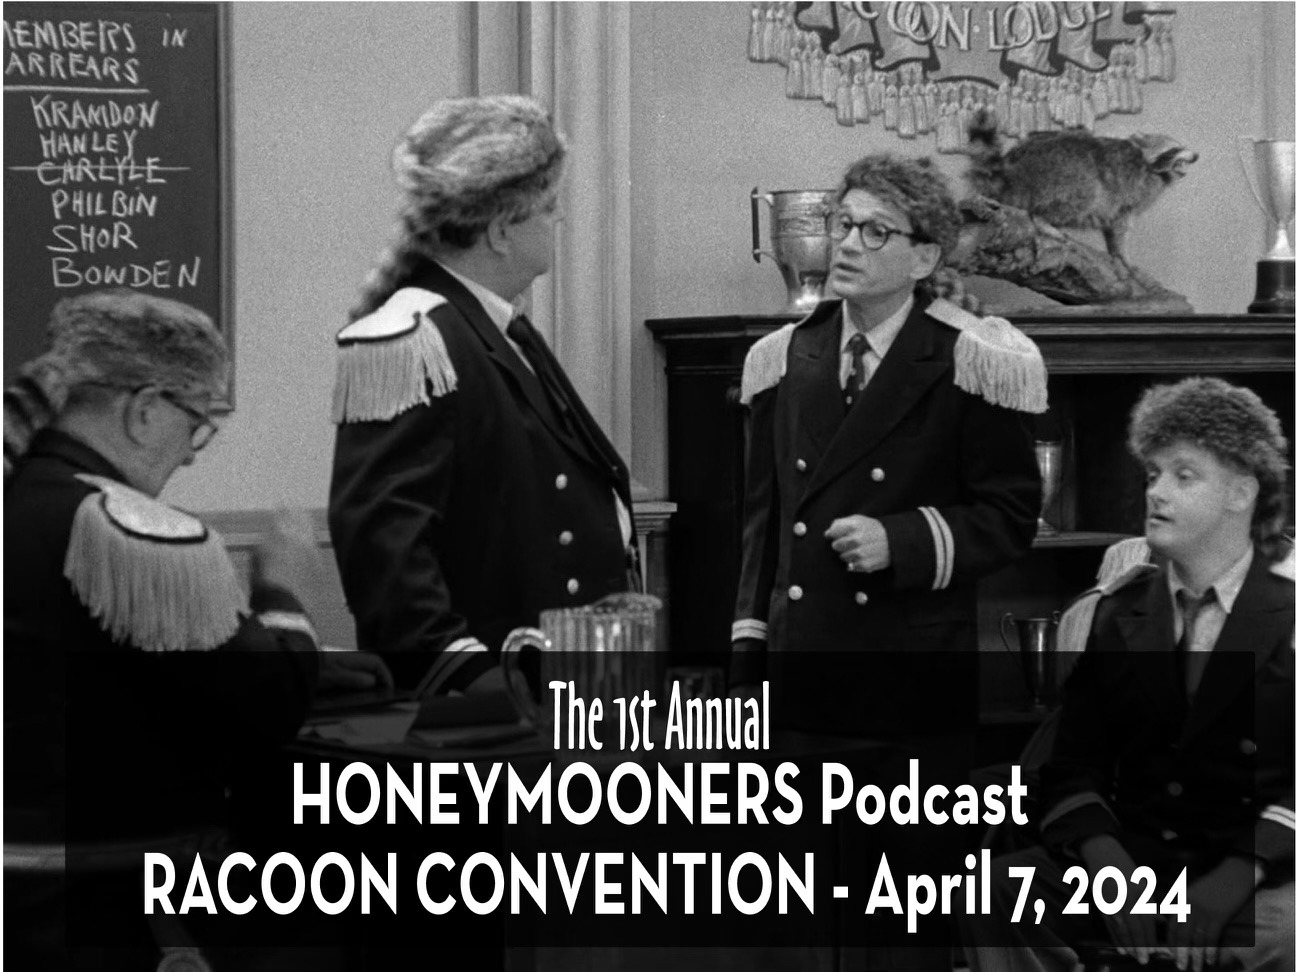 The Honeymooners Podcast Convention – Episode 123